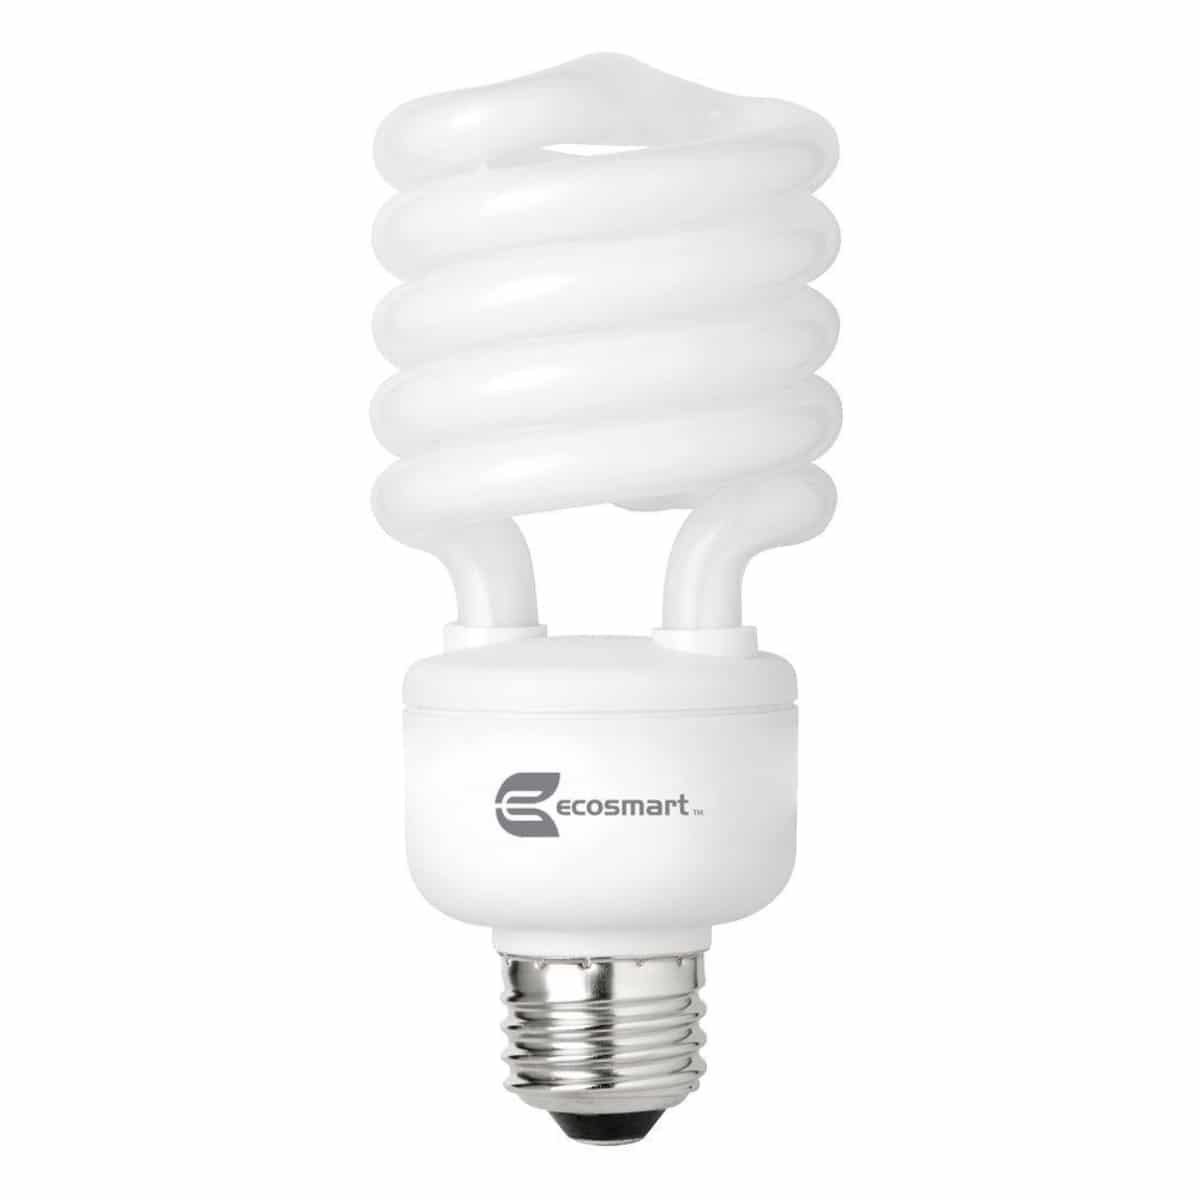 How To Choose The Right Light Bulb For, How To Dispose Of Old Light Bulbs Uk